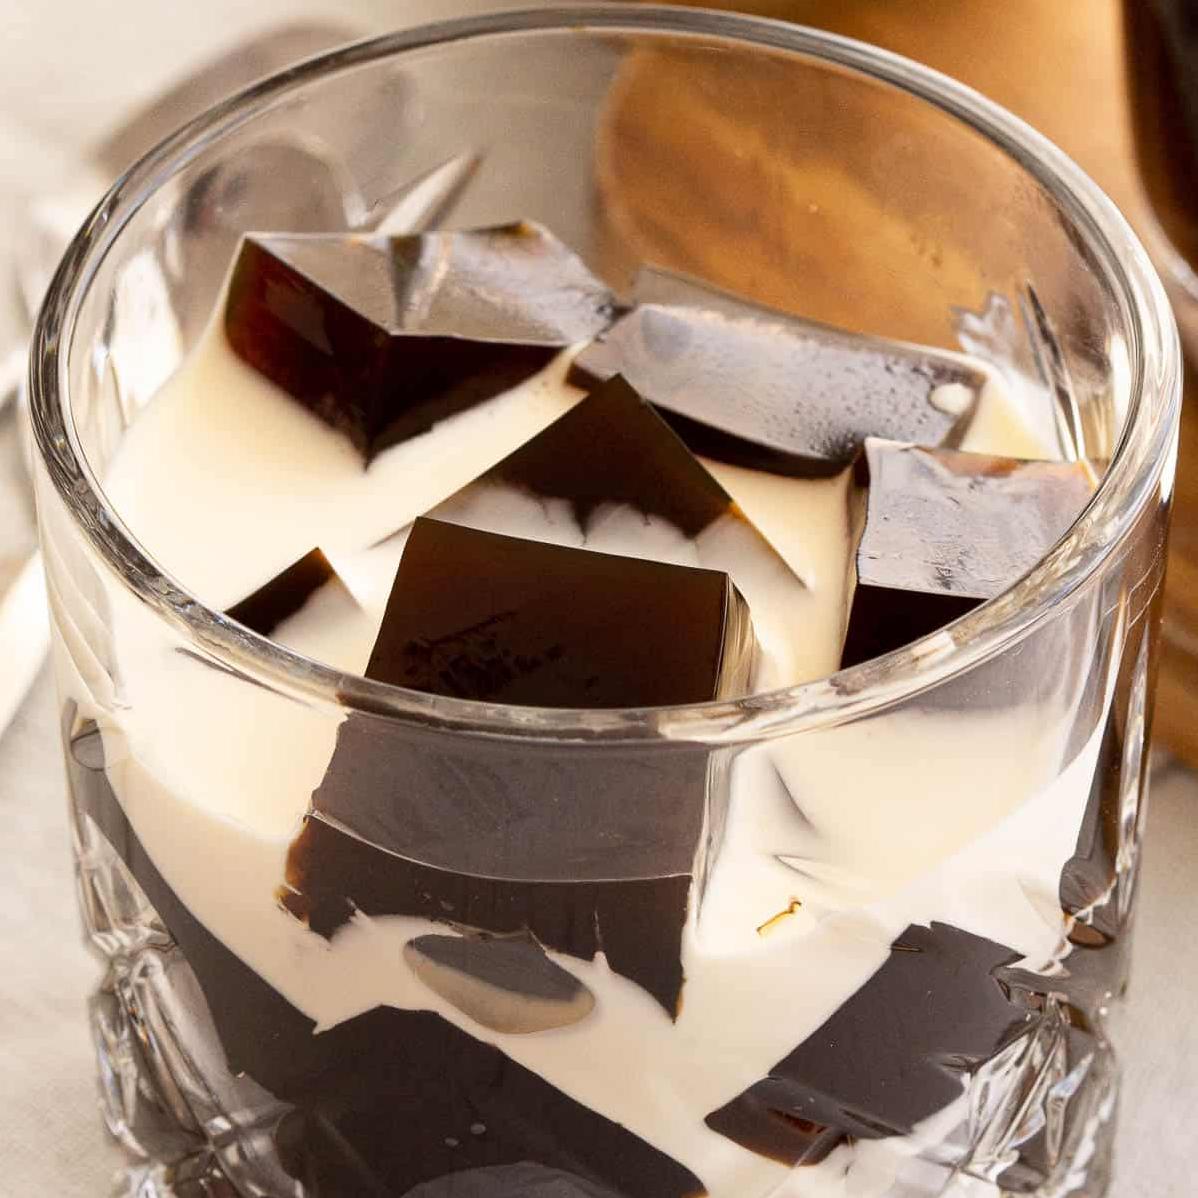  This coffee jello dessert will impress all your guests.